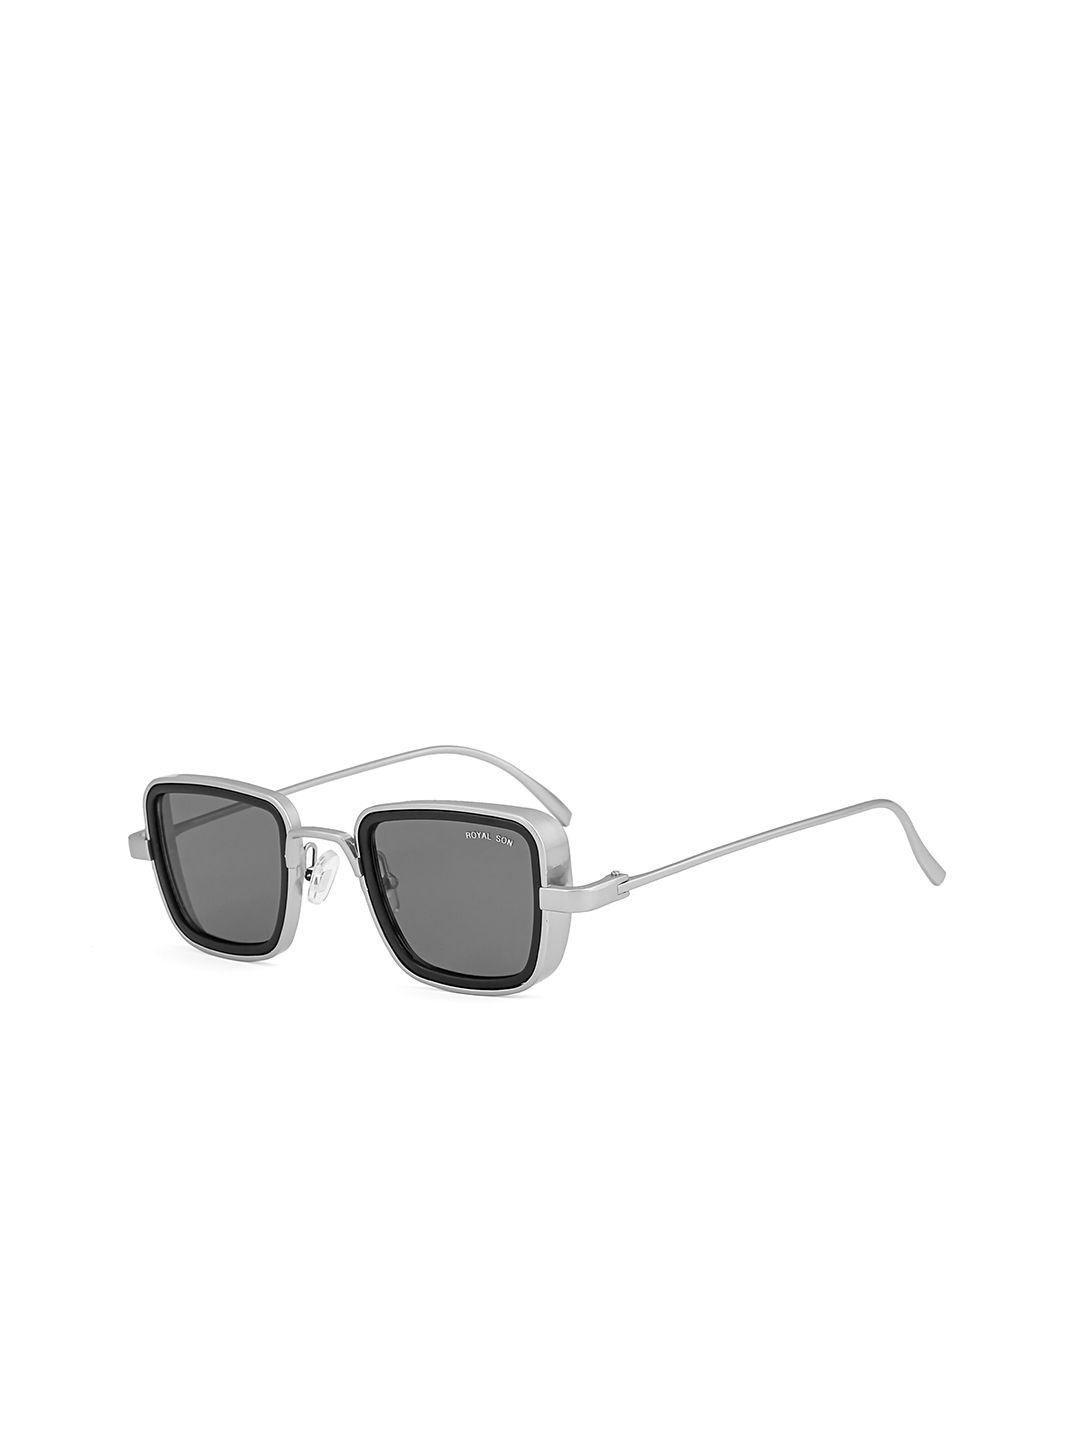 royal son unisex black lens & silver-toned square sunglasses with uv protected lens